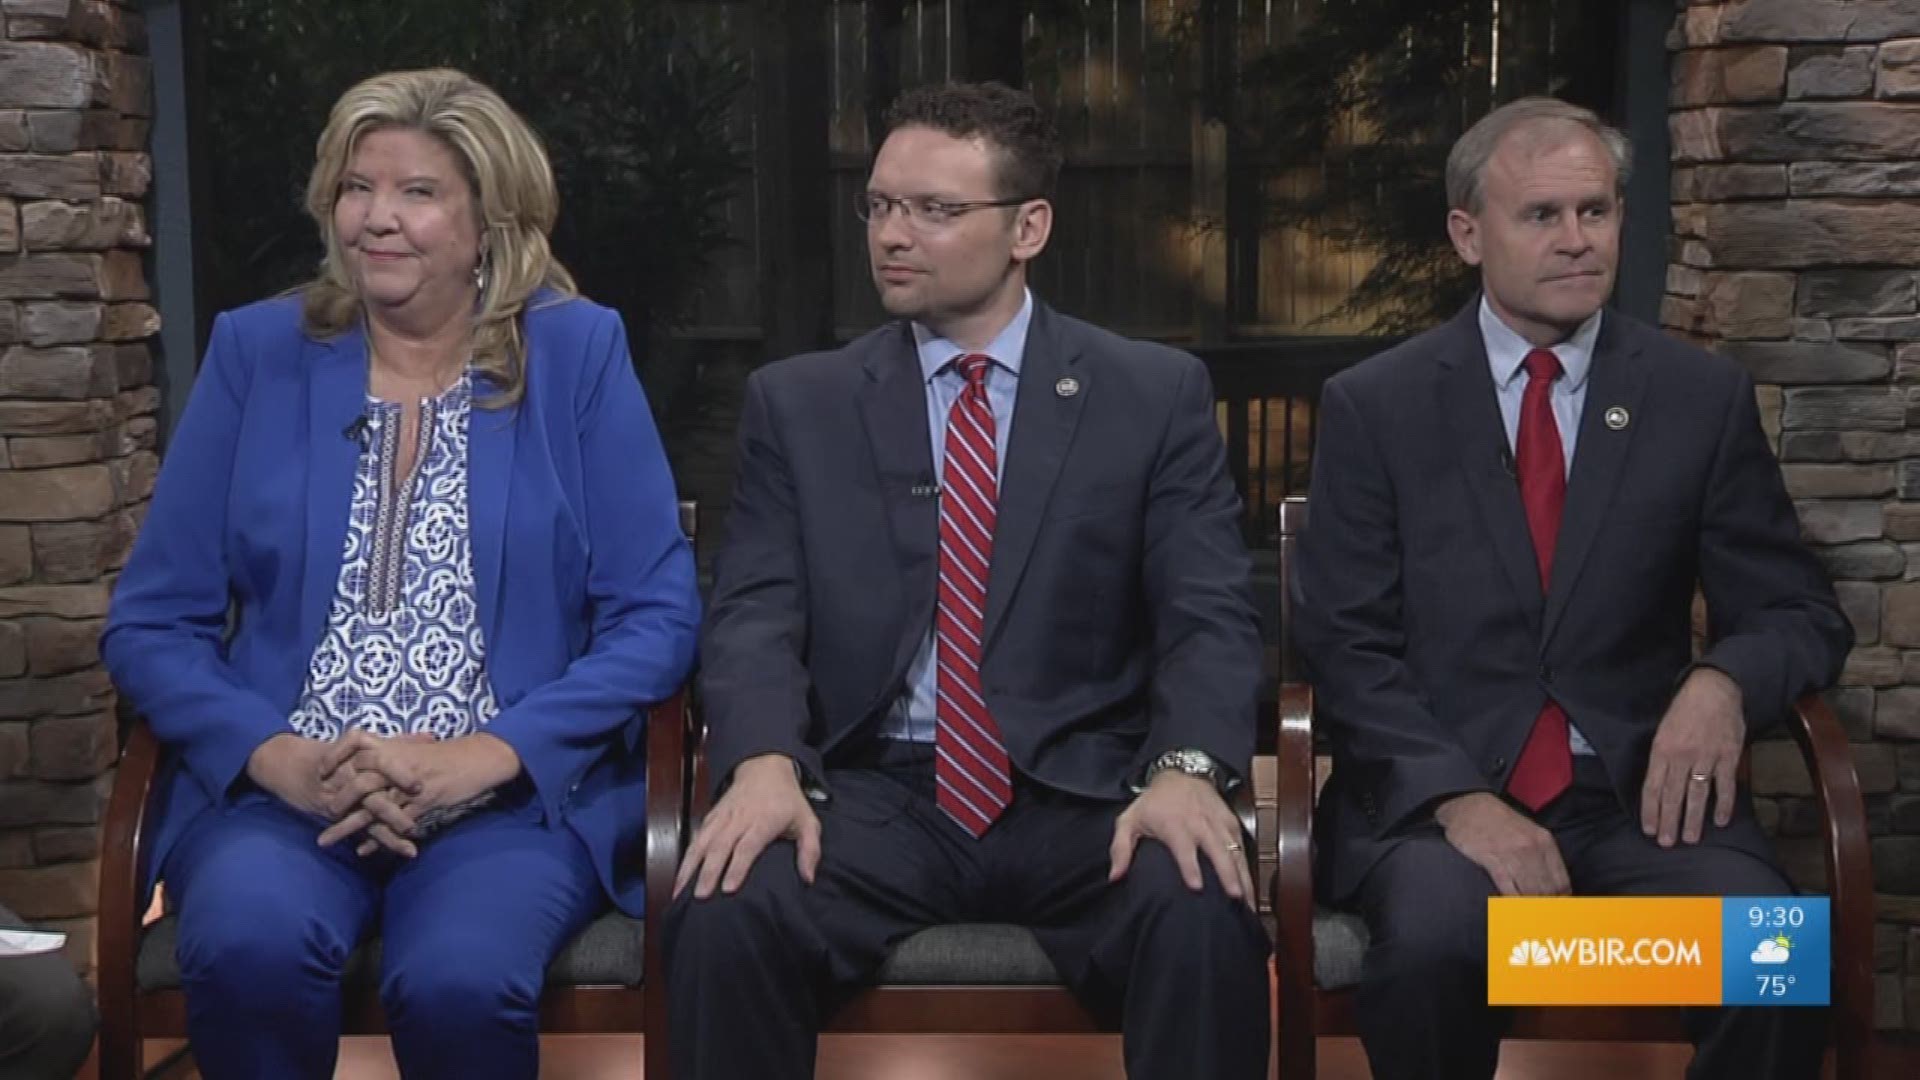 Tennessee House Speaker Pro Tempore Bill Dunn and members Gloria Johnson and Jason Zachary talk about the fall of Speaker Glen Casada.